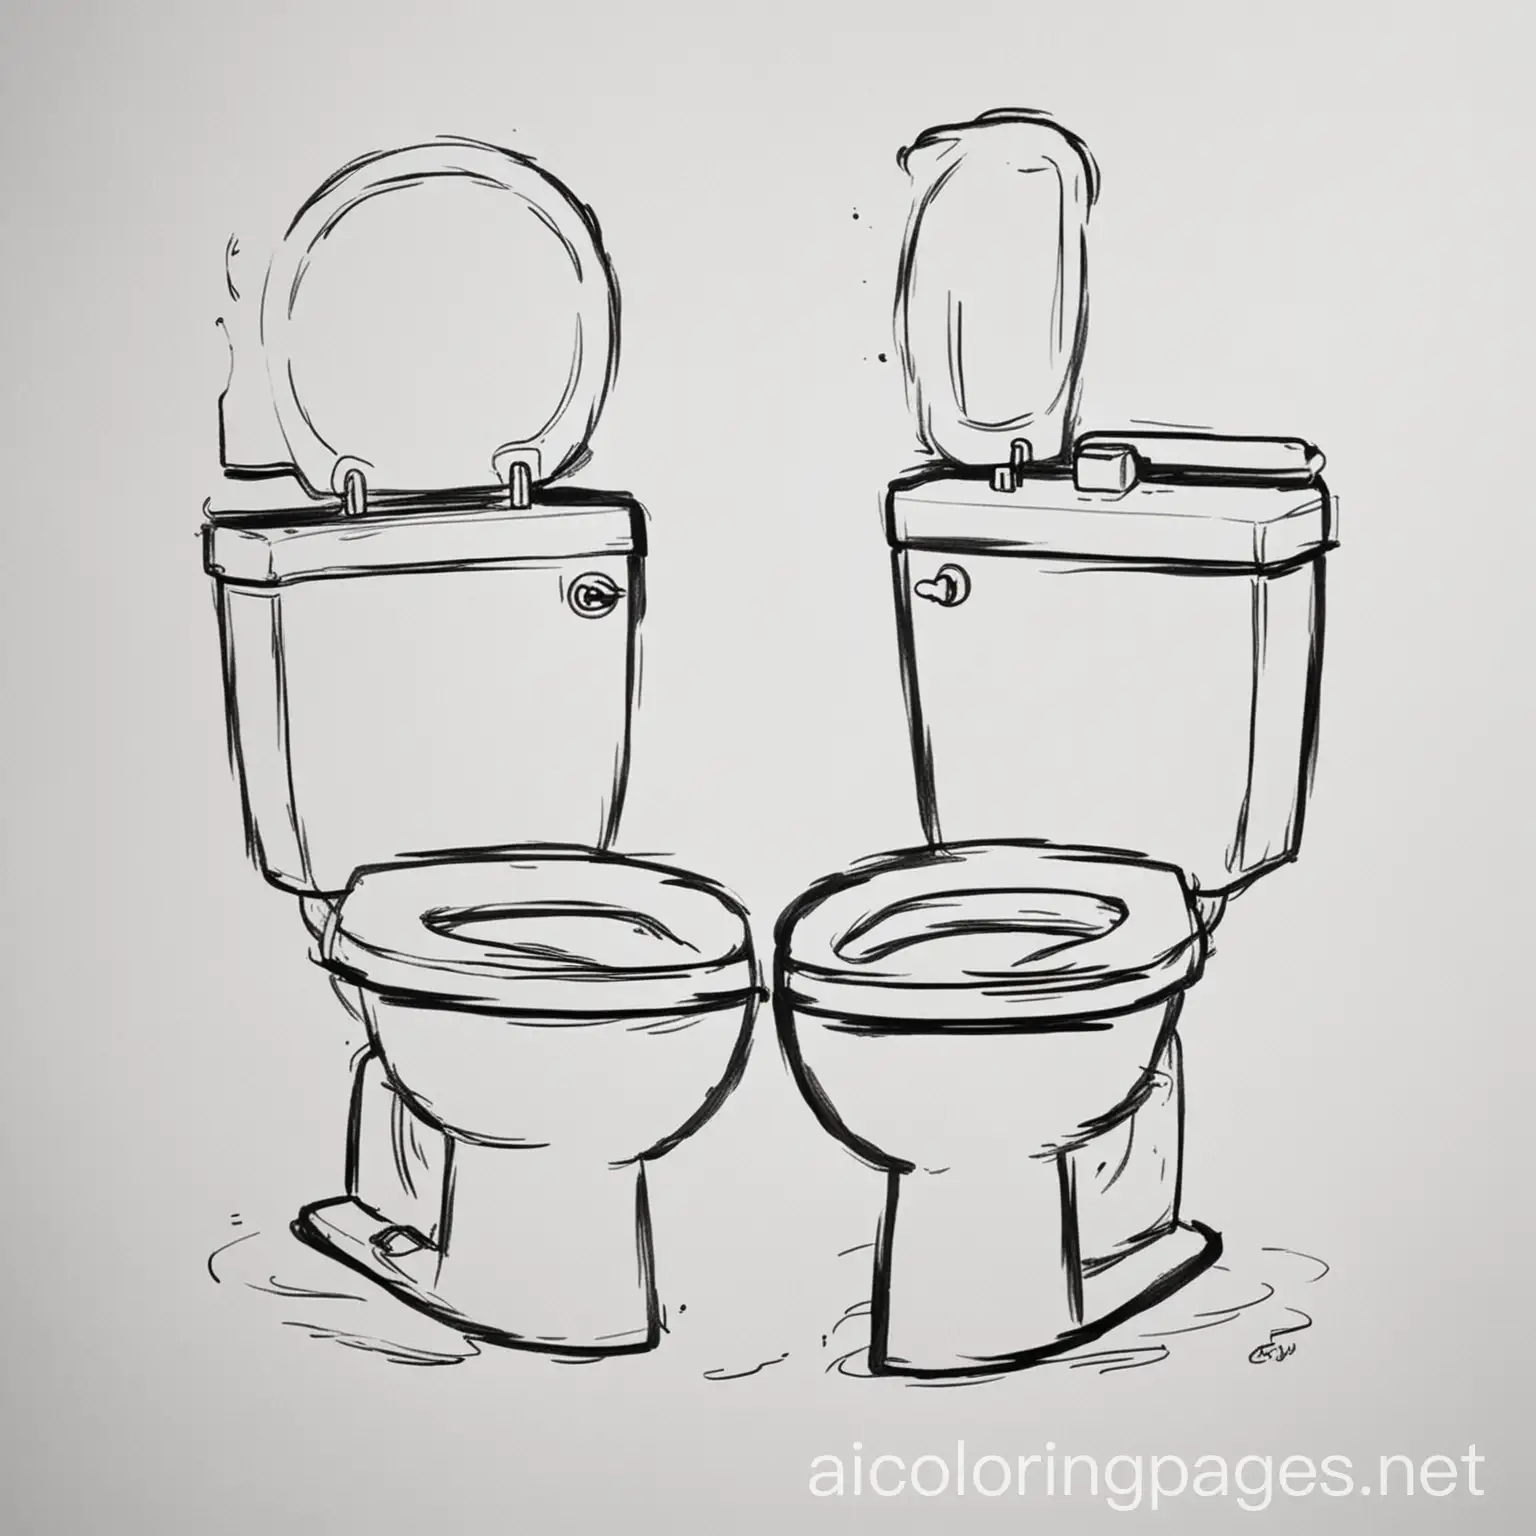 Toilets fighting eachother, Coloring Page, black and white, line art, white background, Simplicity, Ample White Space. The background of the coloring page is plain white to make it easy for young children to color within the lines. The outlines of all the subjects are easy to distinguish, making it simple for kids to color without too much difficulty